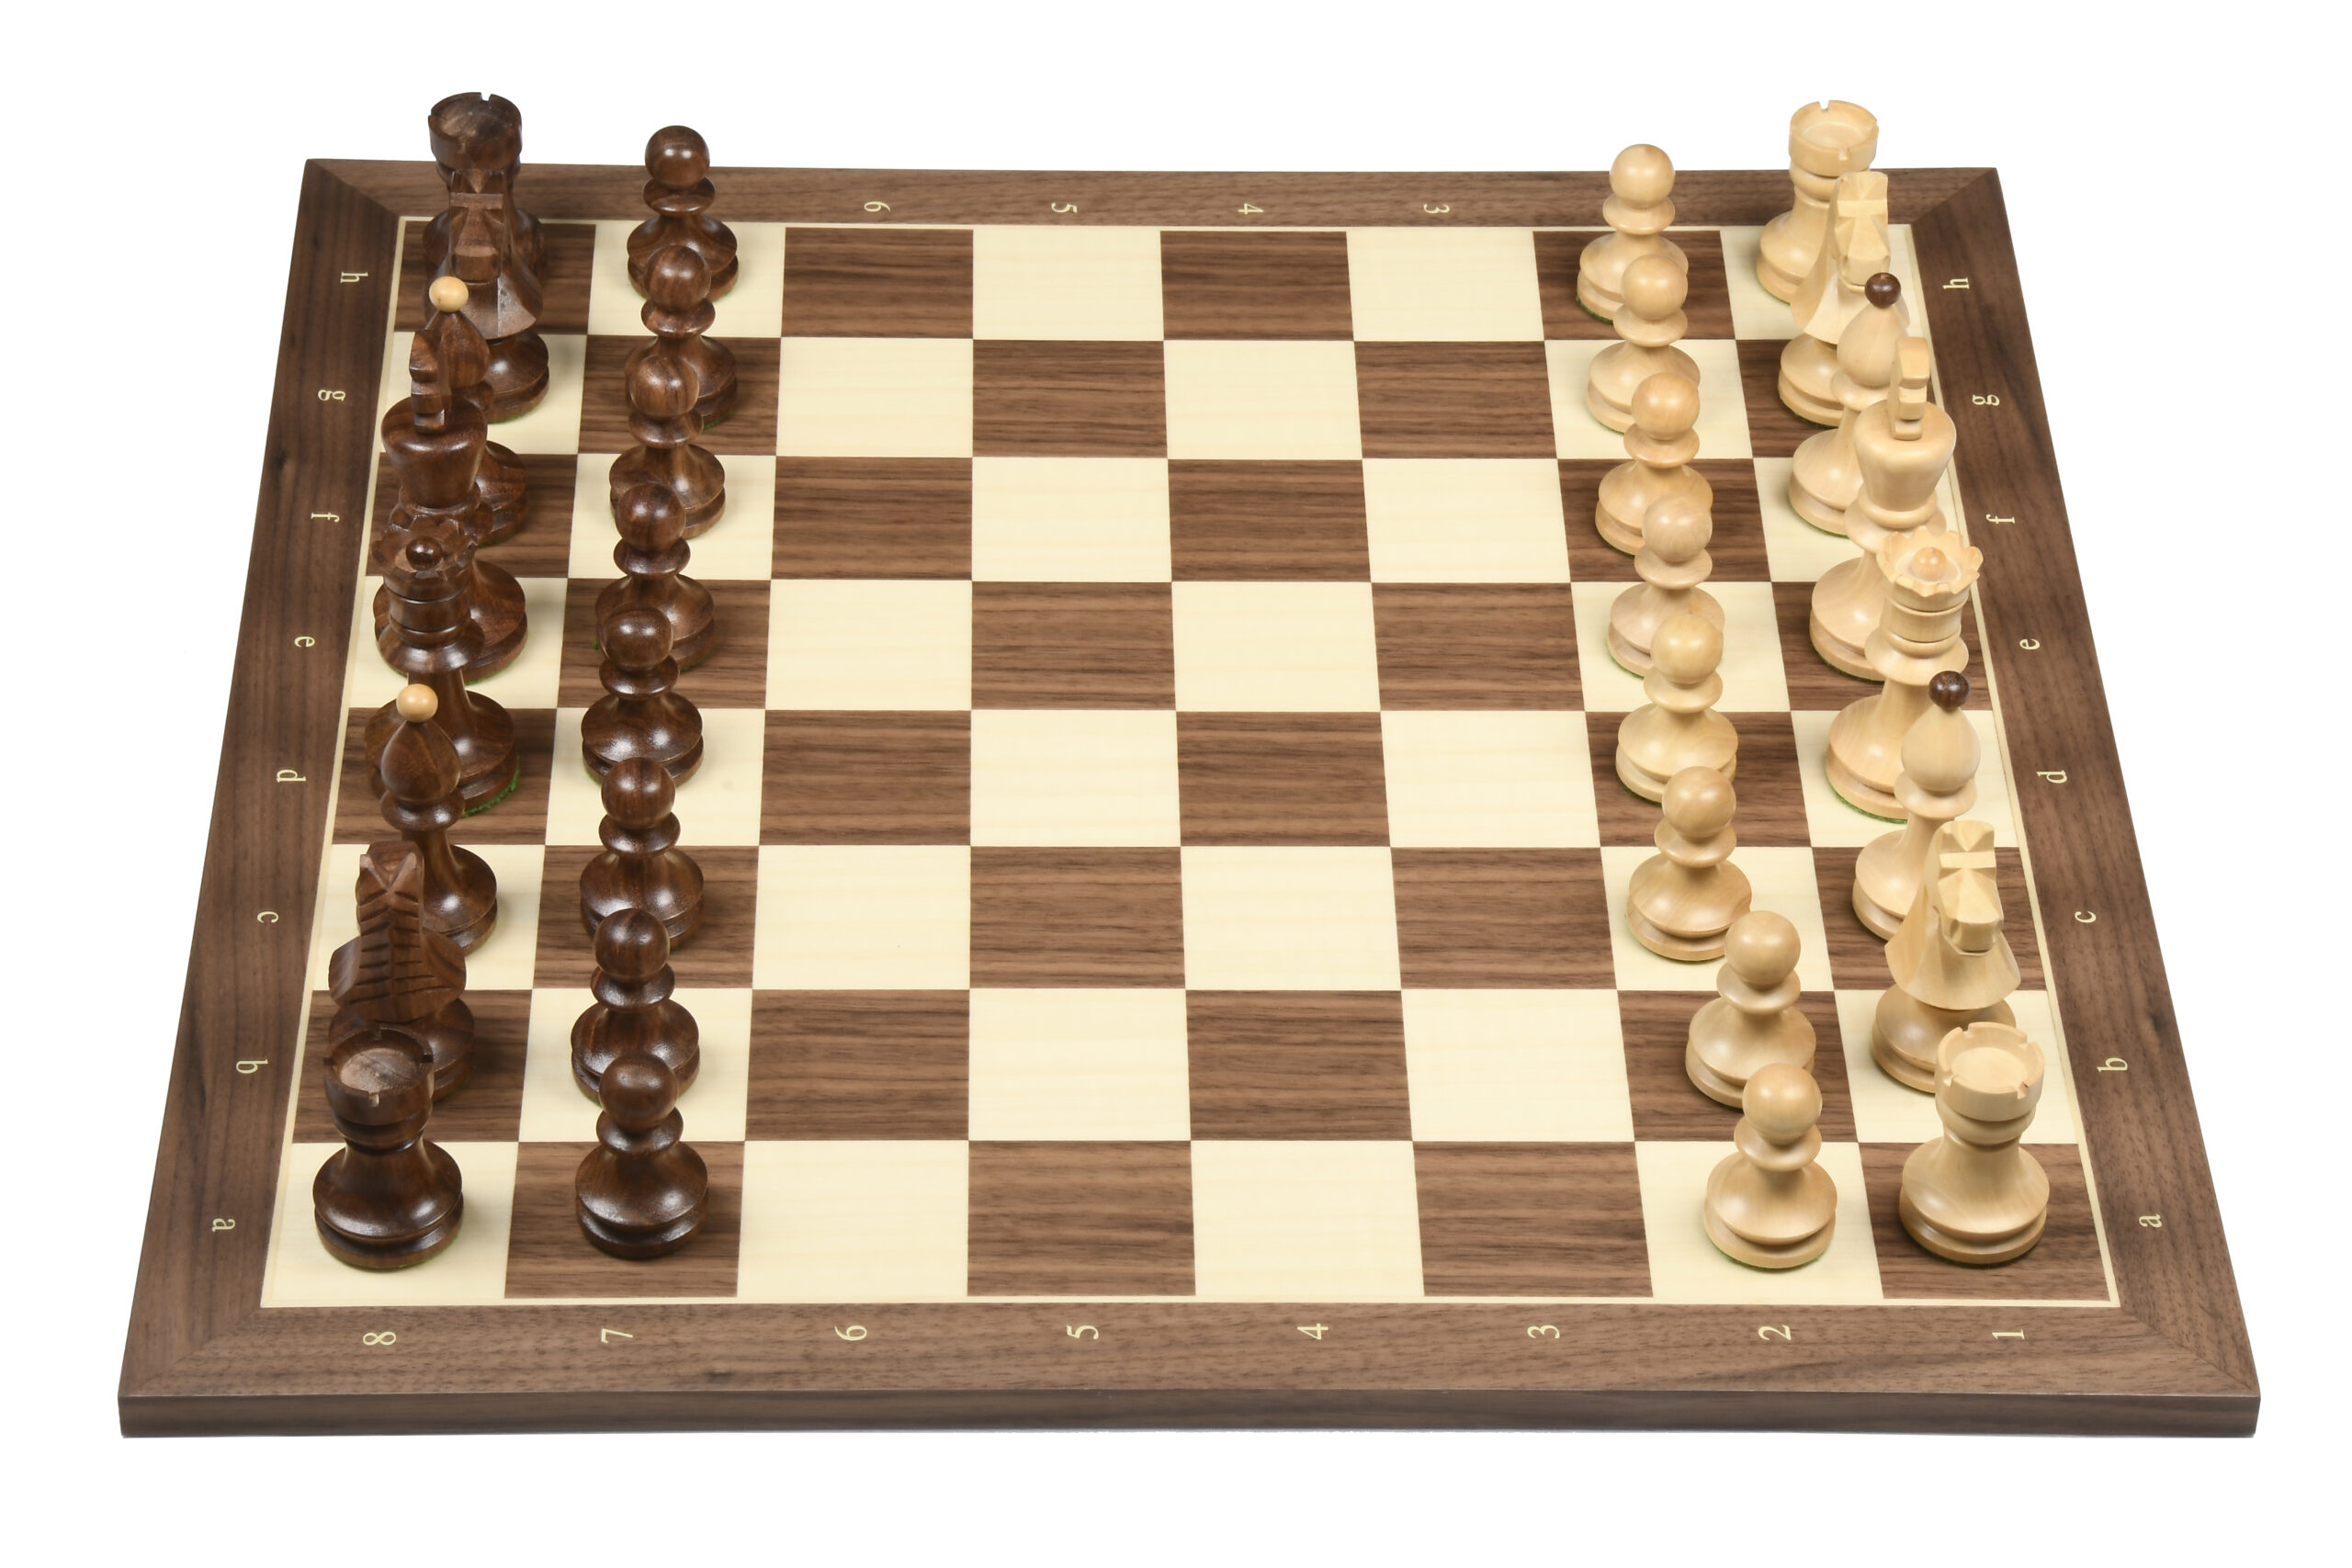 HOW TO SETUP CHESS BOARD? 